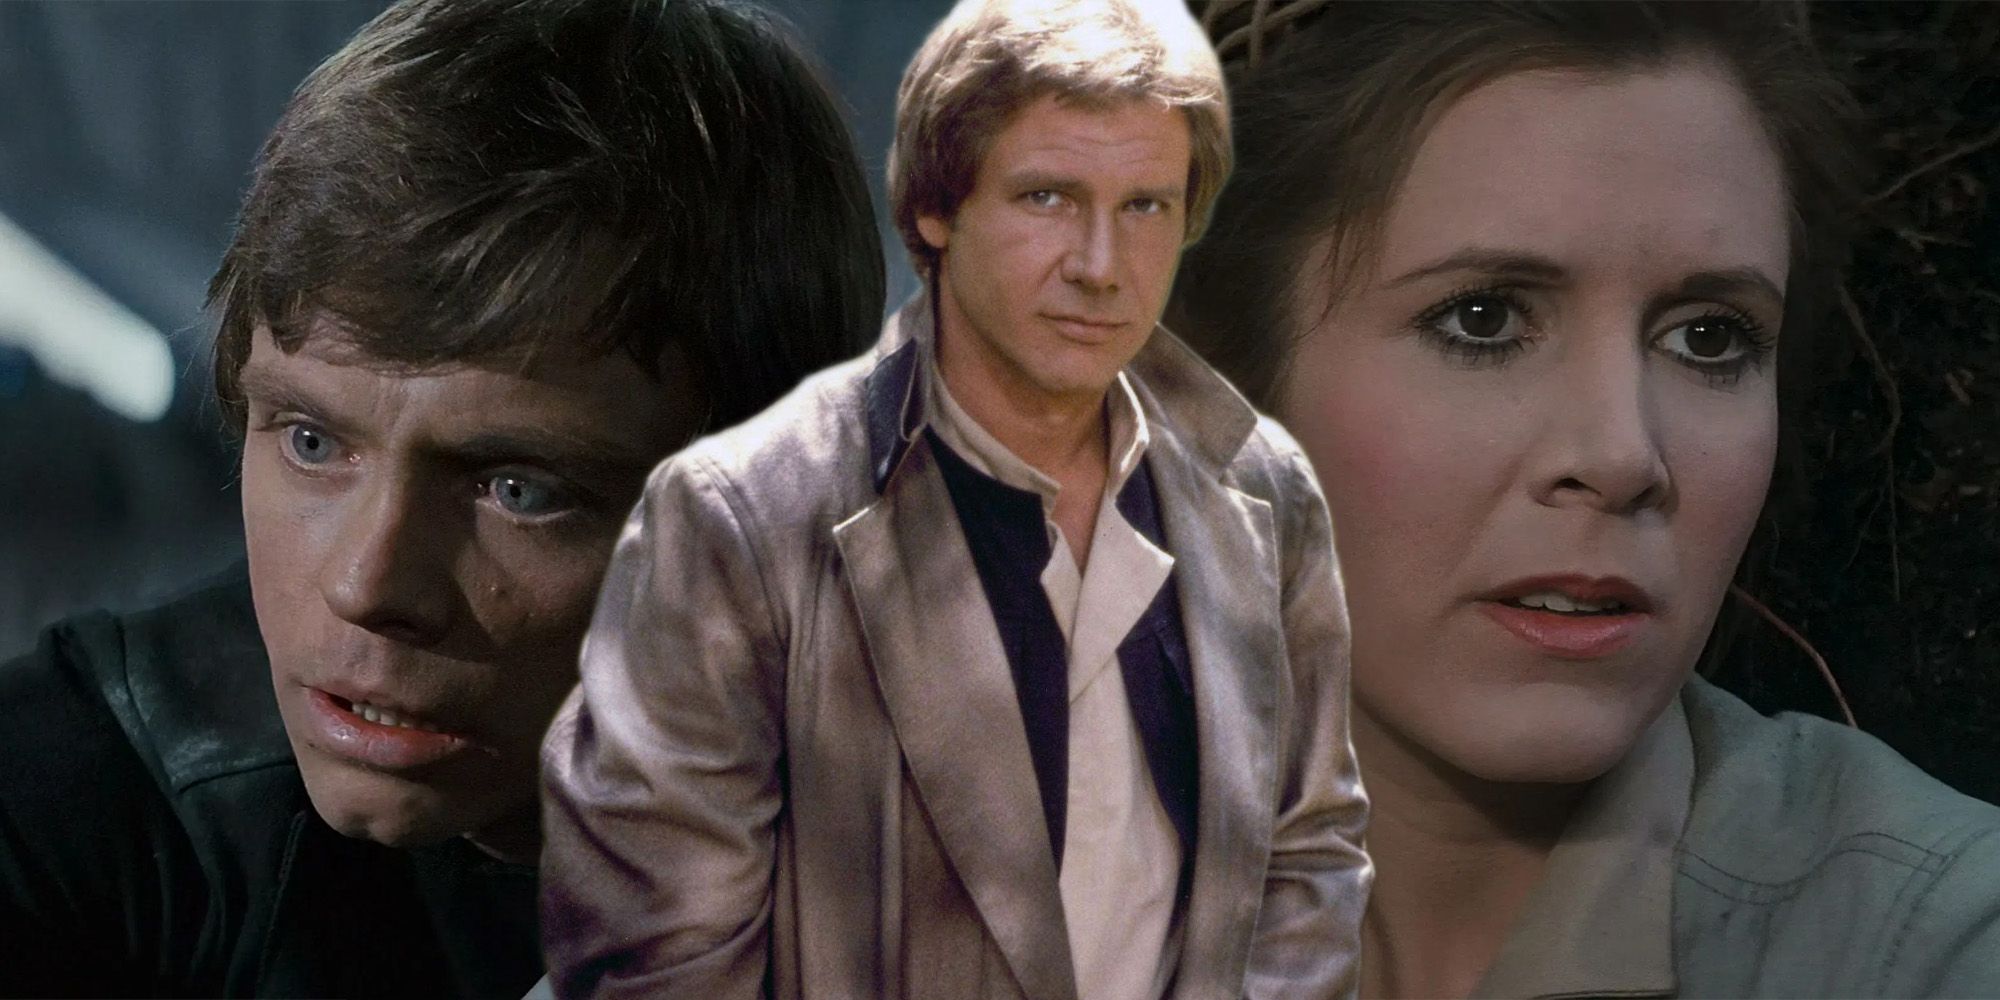 Han in front of Luke and Leia in Return of the Jedi